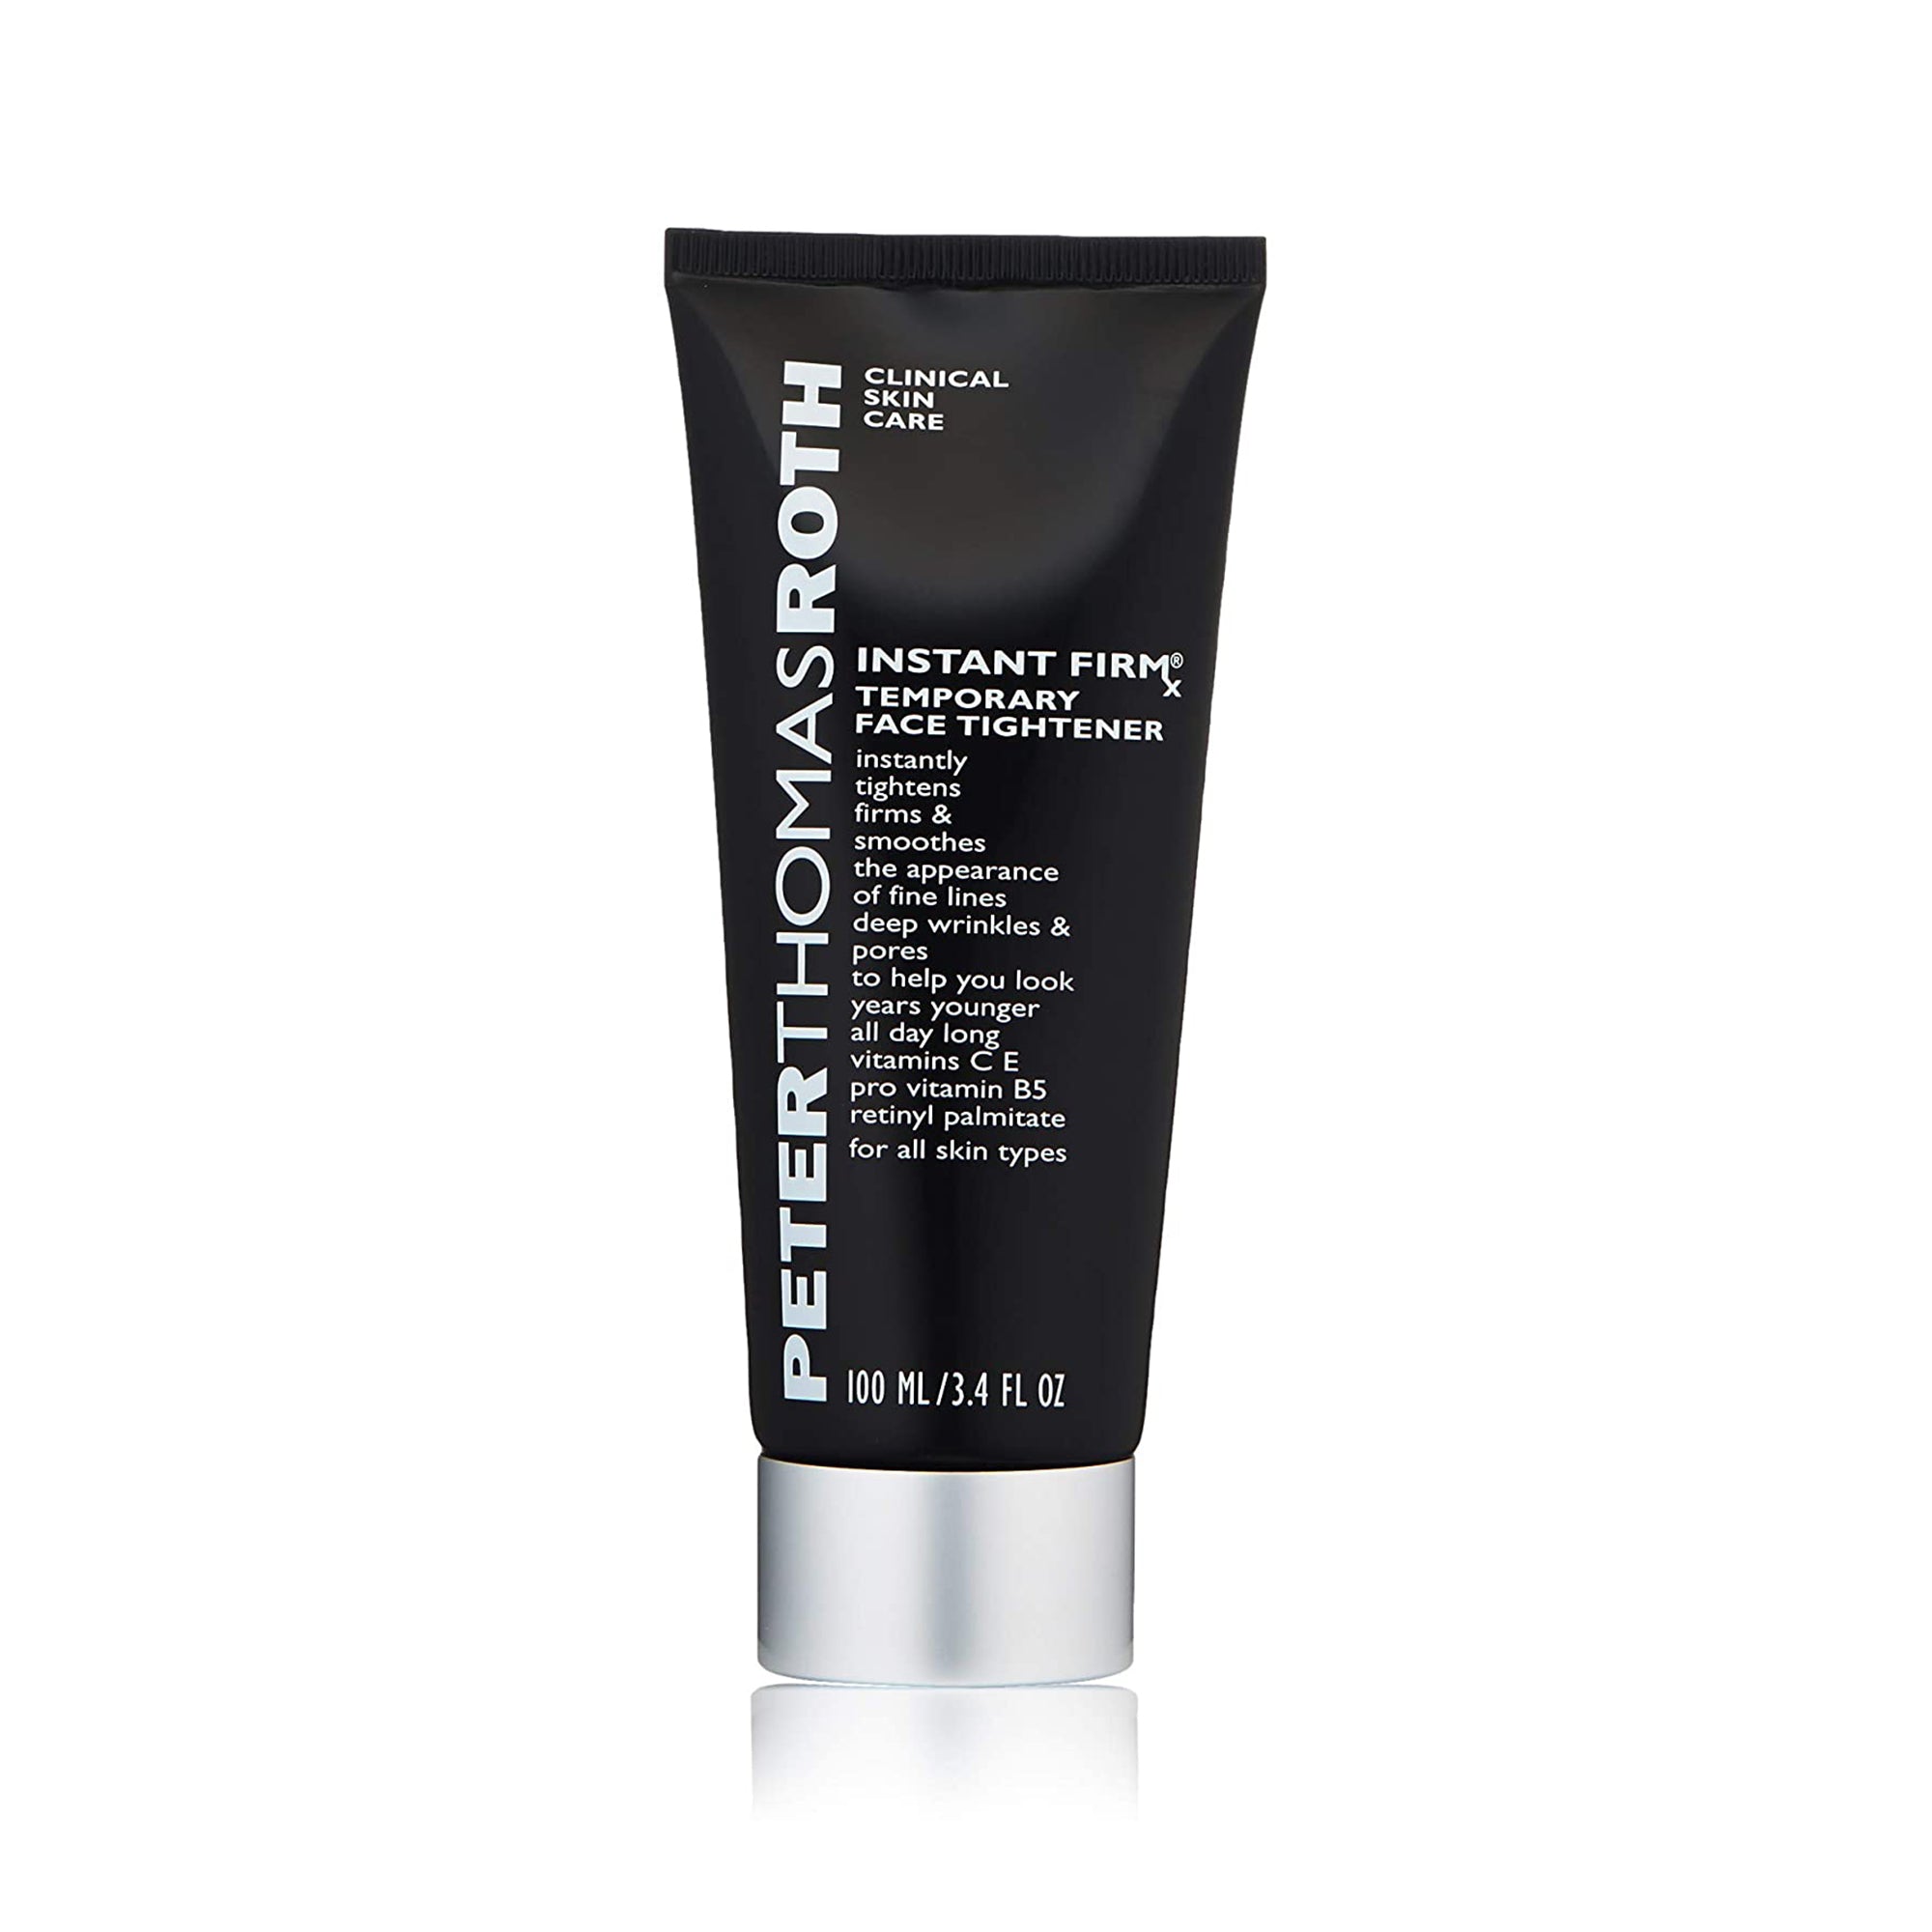 Peter Thomas Roth Instant FirmX Temporary Face Tightener / 3.4OZ